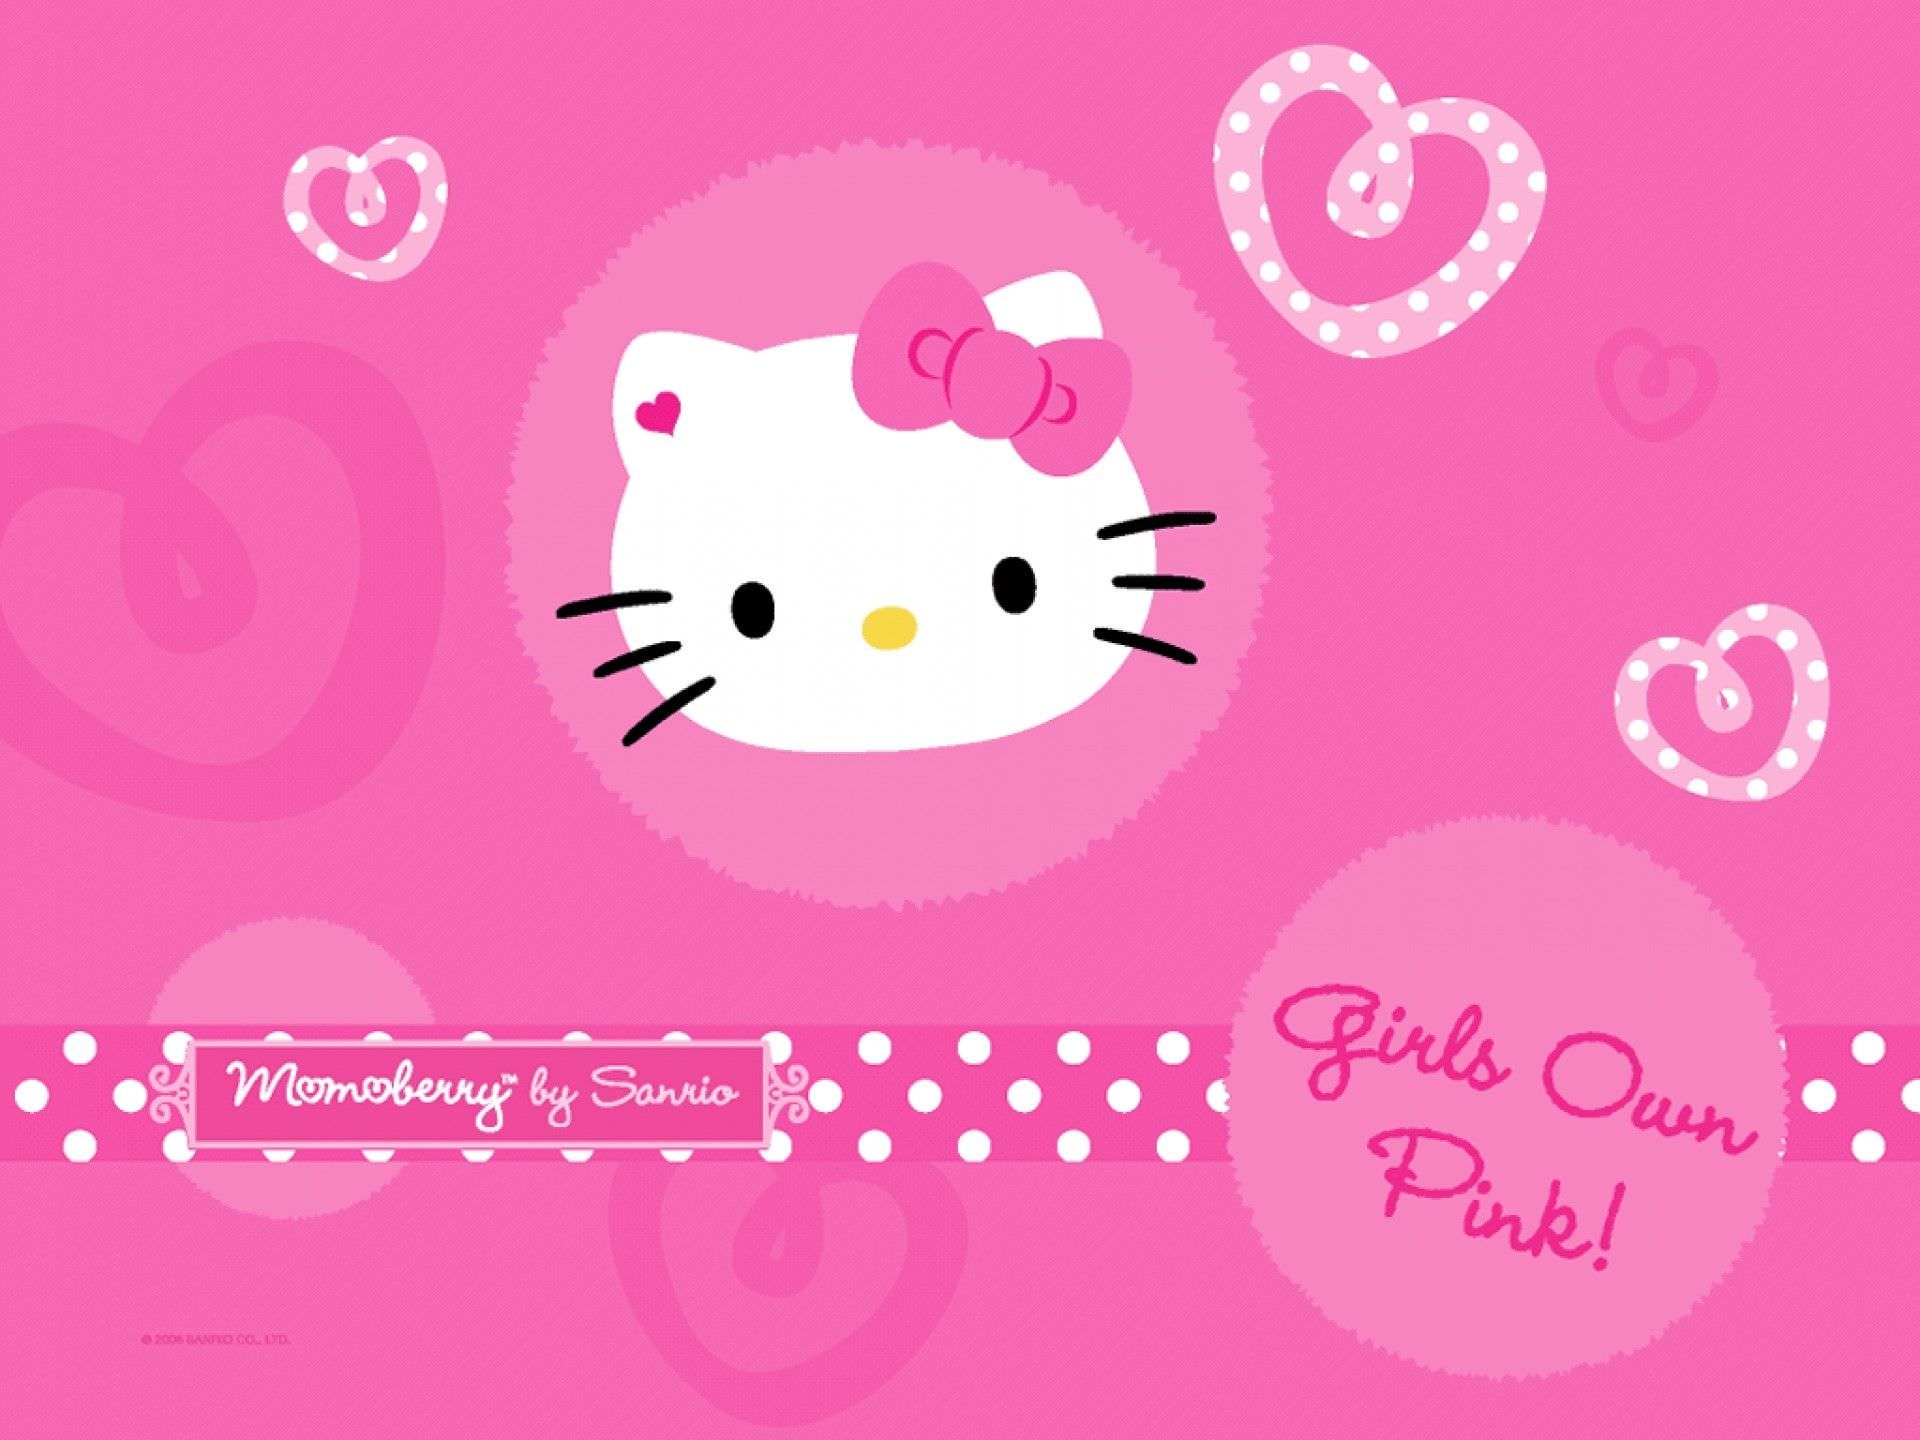 30+ Hello Kitty Backgrounds, Wallpapers, Images | Design Trends